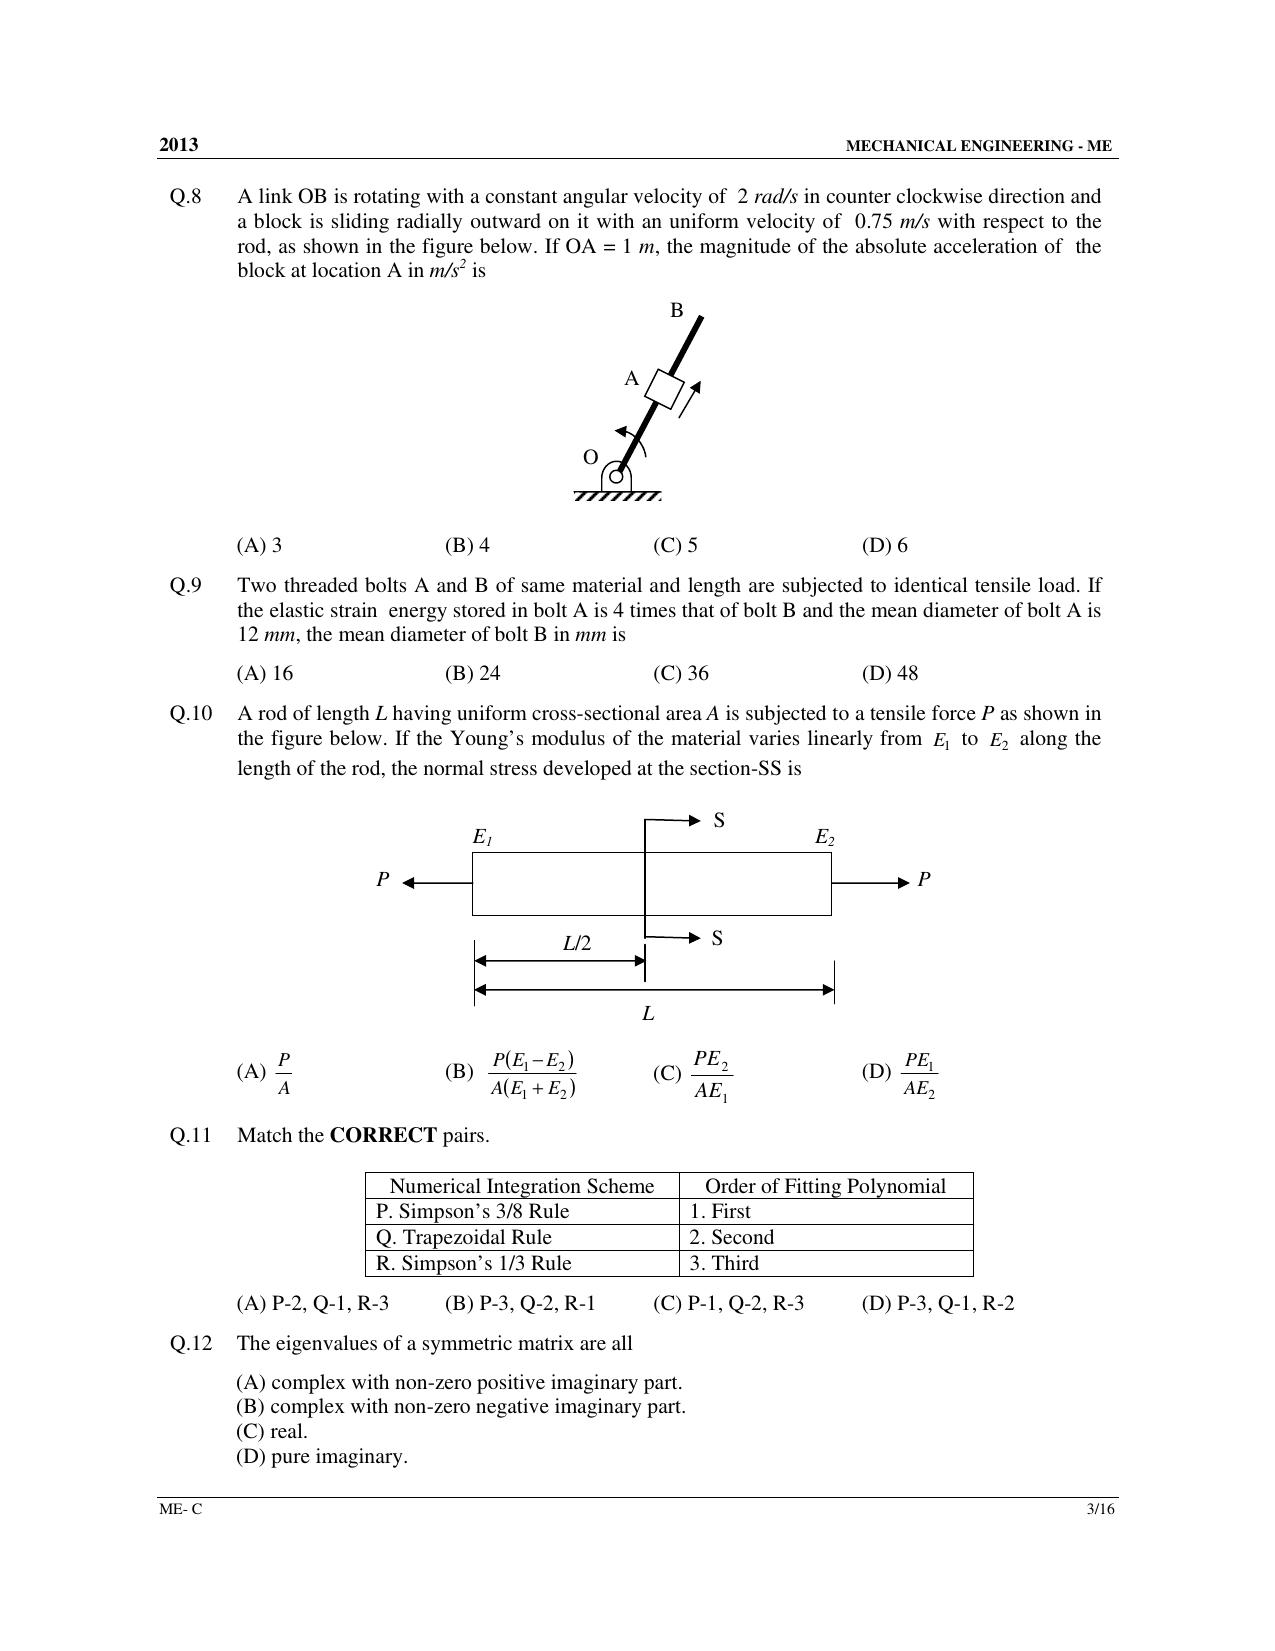 GATE 2013 Mechanical Engineering (ME) Question Paper with Answer Key - Page 32